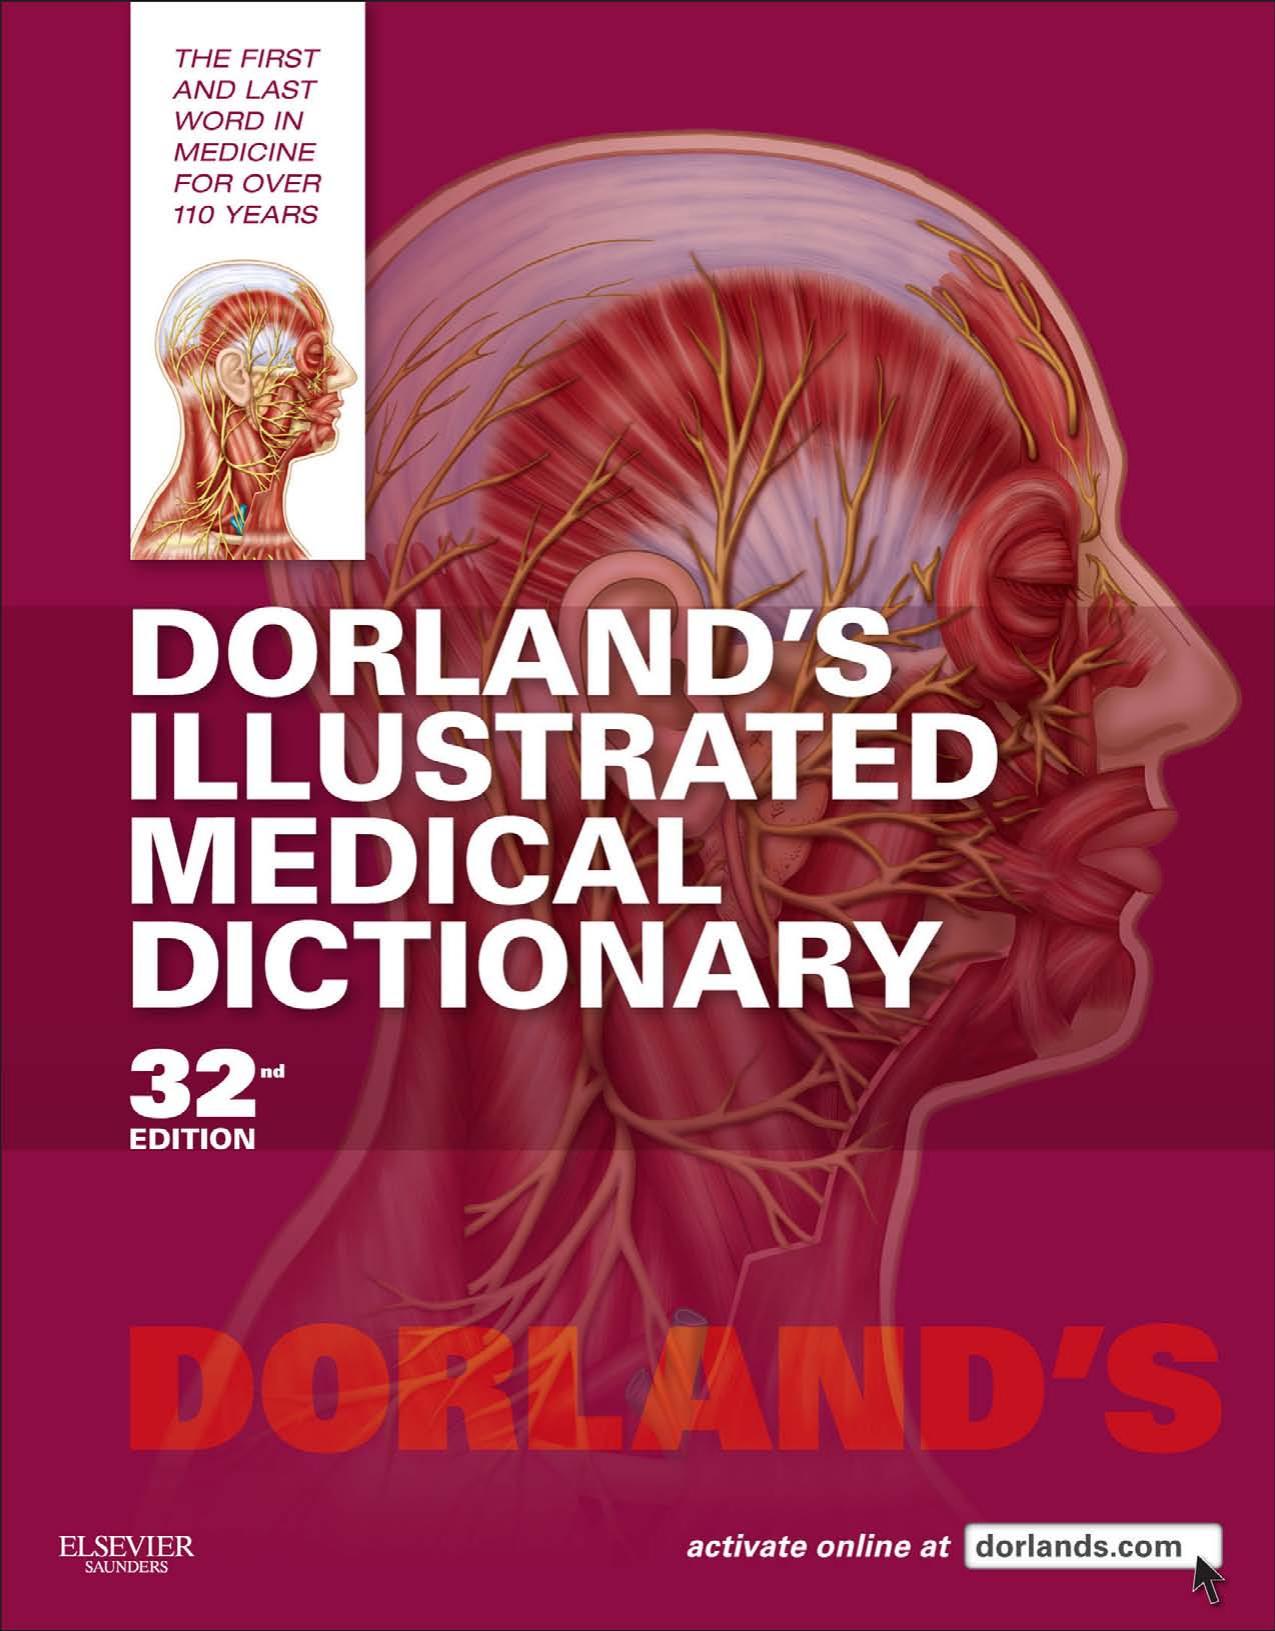 Dorland's Illustrated Medical Dictionary, 32nd Edition - Dorland, W. A. Newman.jpg